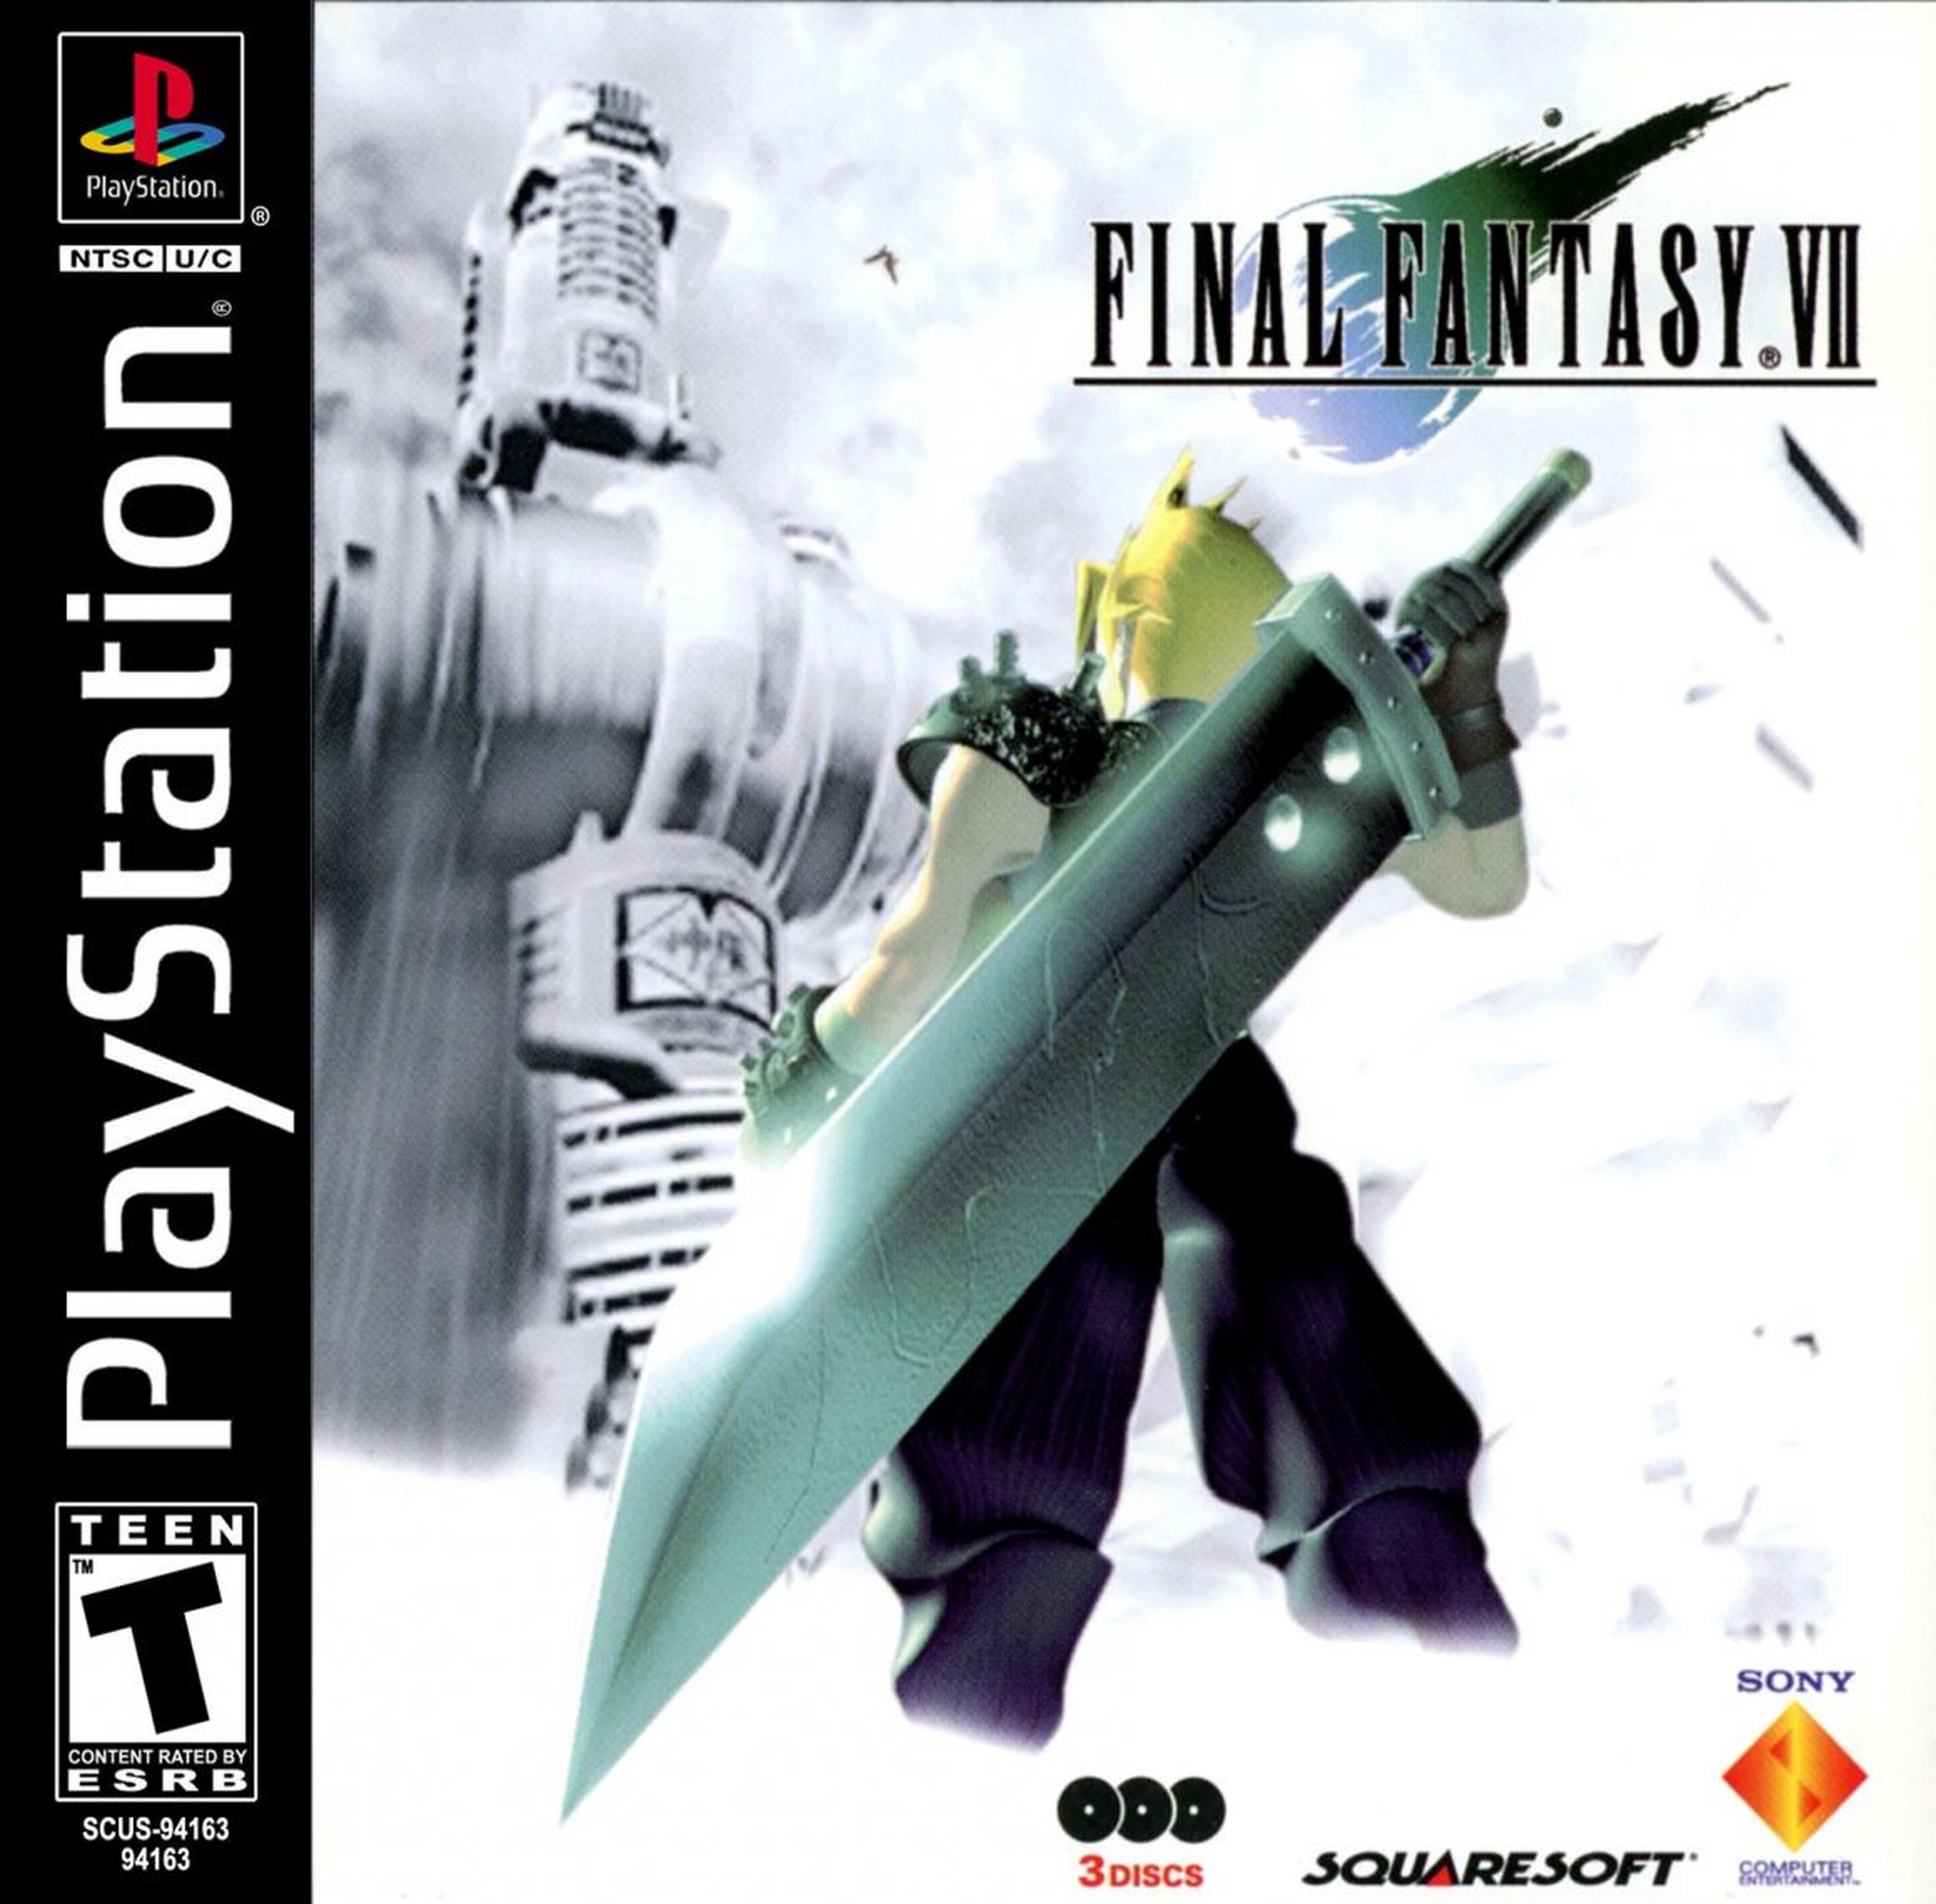 One of the most iconic games on the PlayStation 1, "Final Fantasy VII," is a highlight of the PlayStation Classic's game lineup.